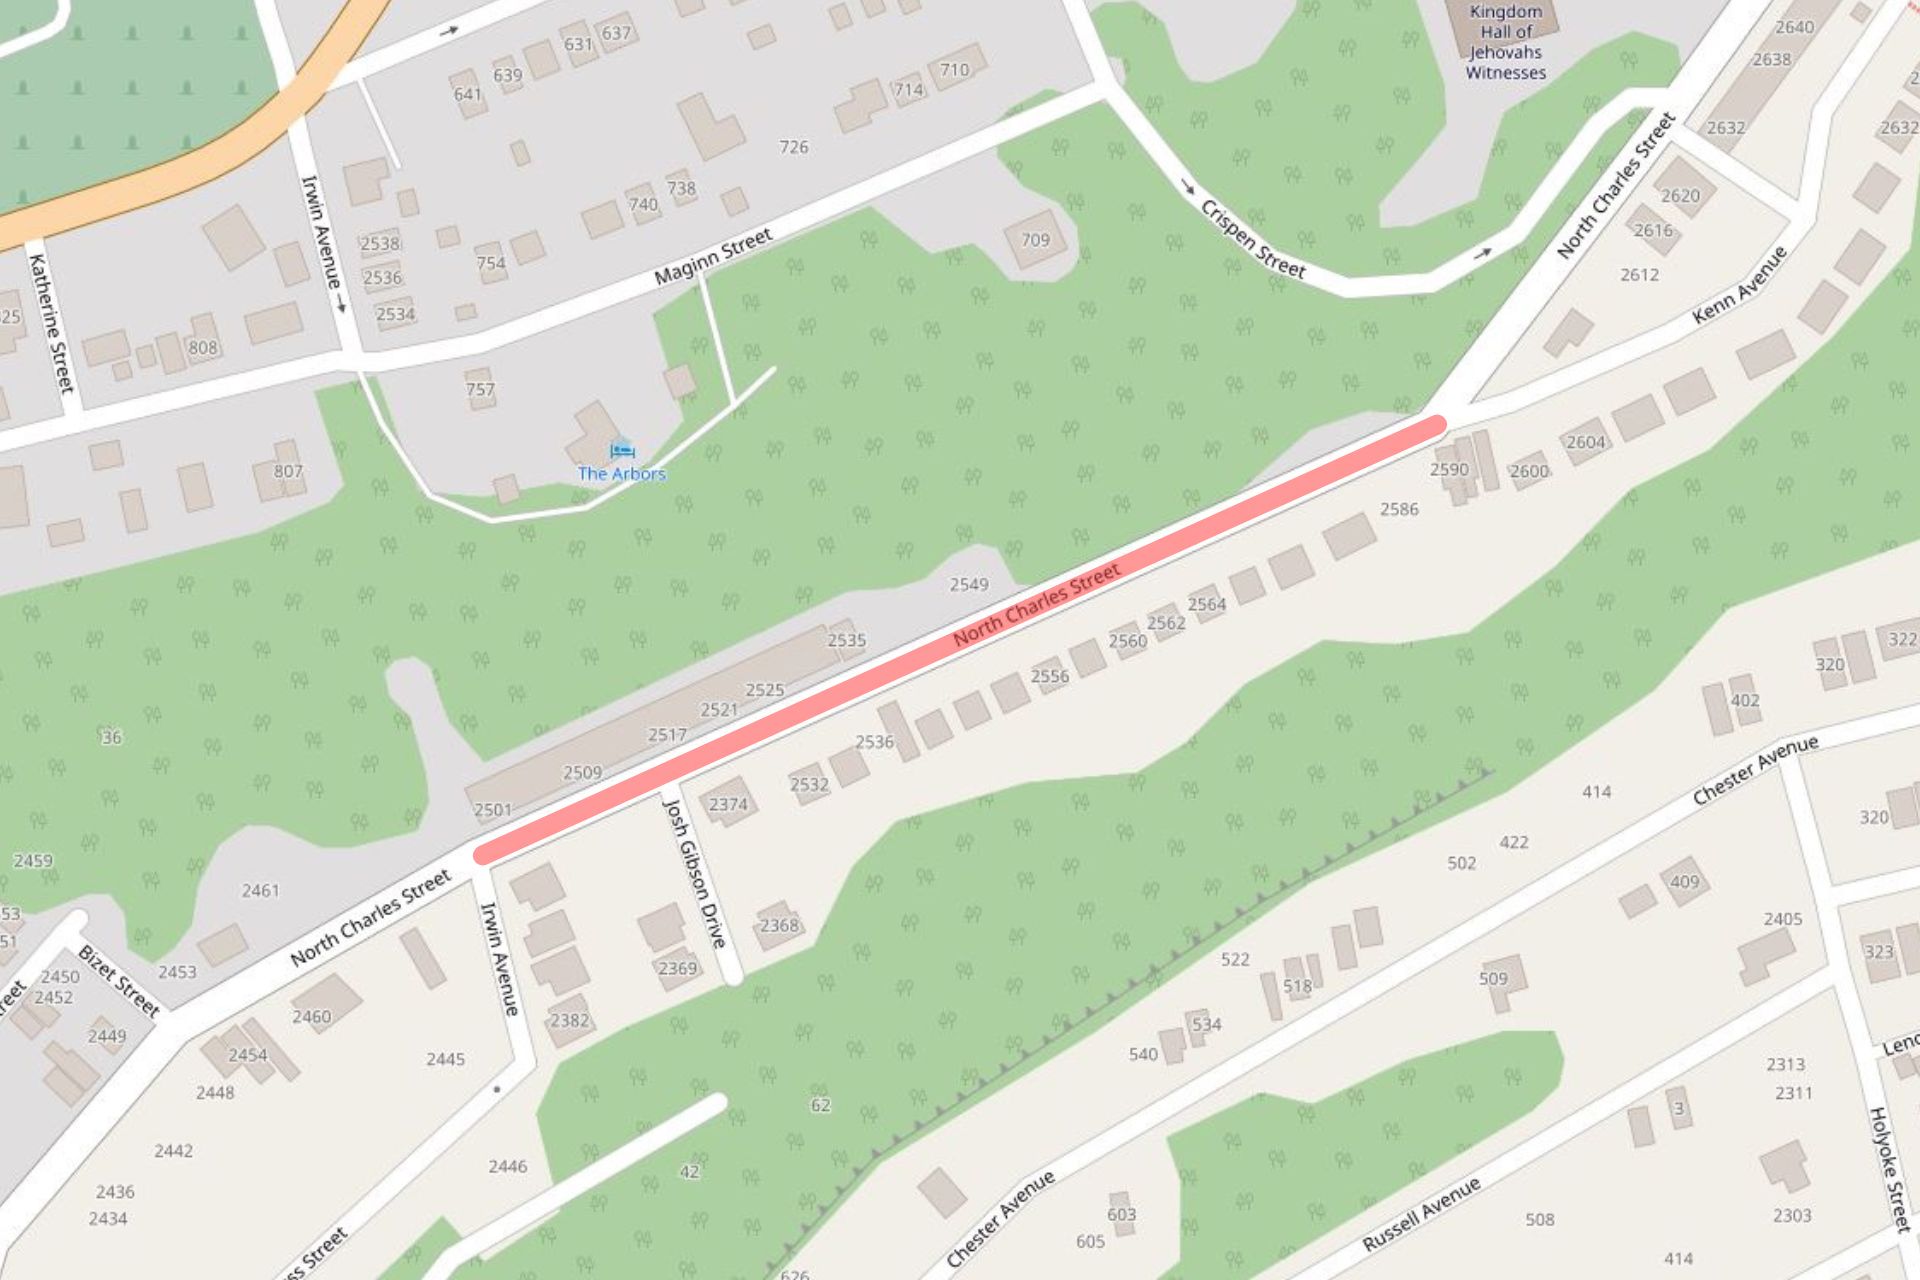 A map of the Charles Street Valley that shows the area of North Charles Street between Irwin Avenue and Kenn Avenue highlighted in red, indicating where the City will implement traffic calming measures.